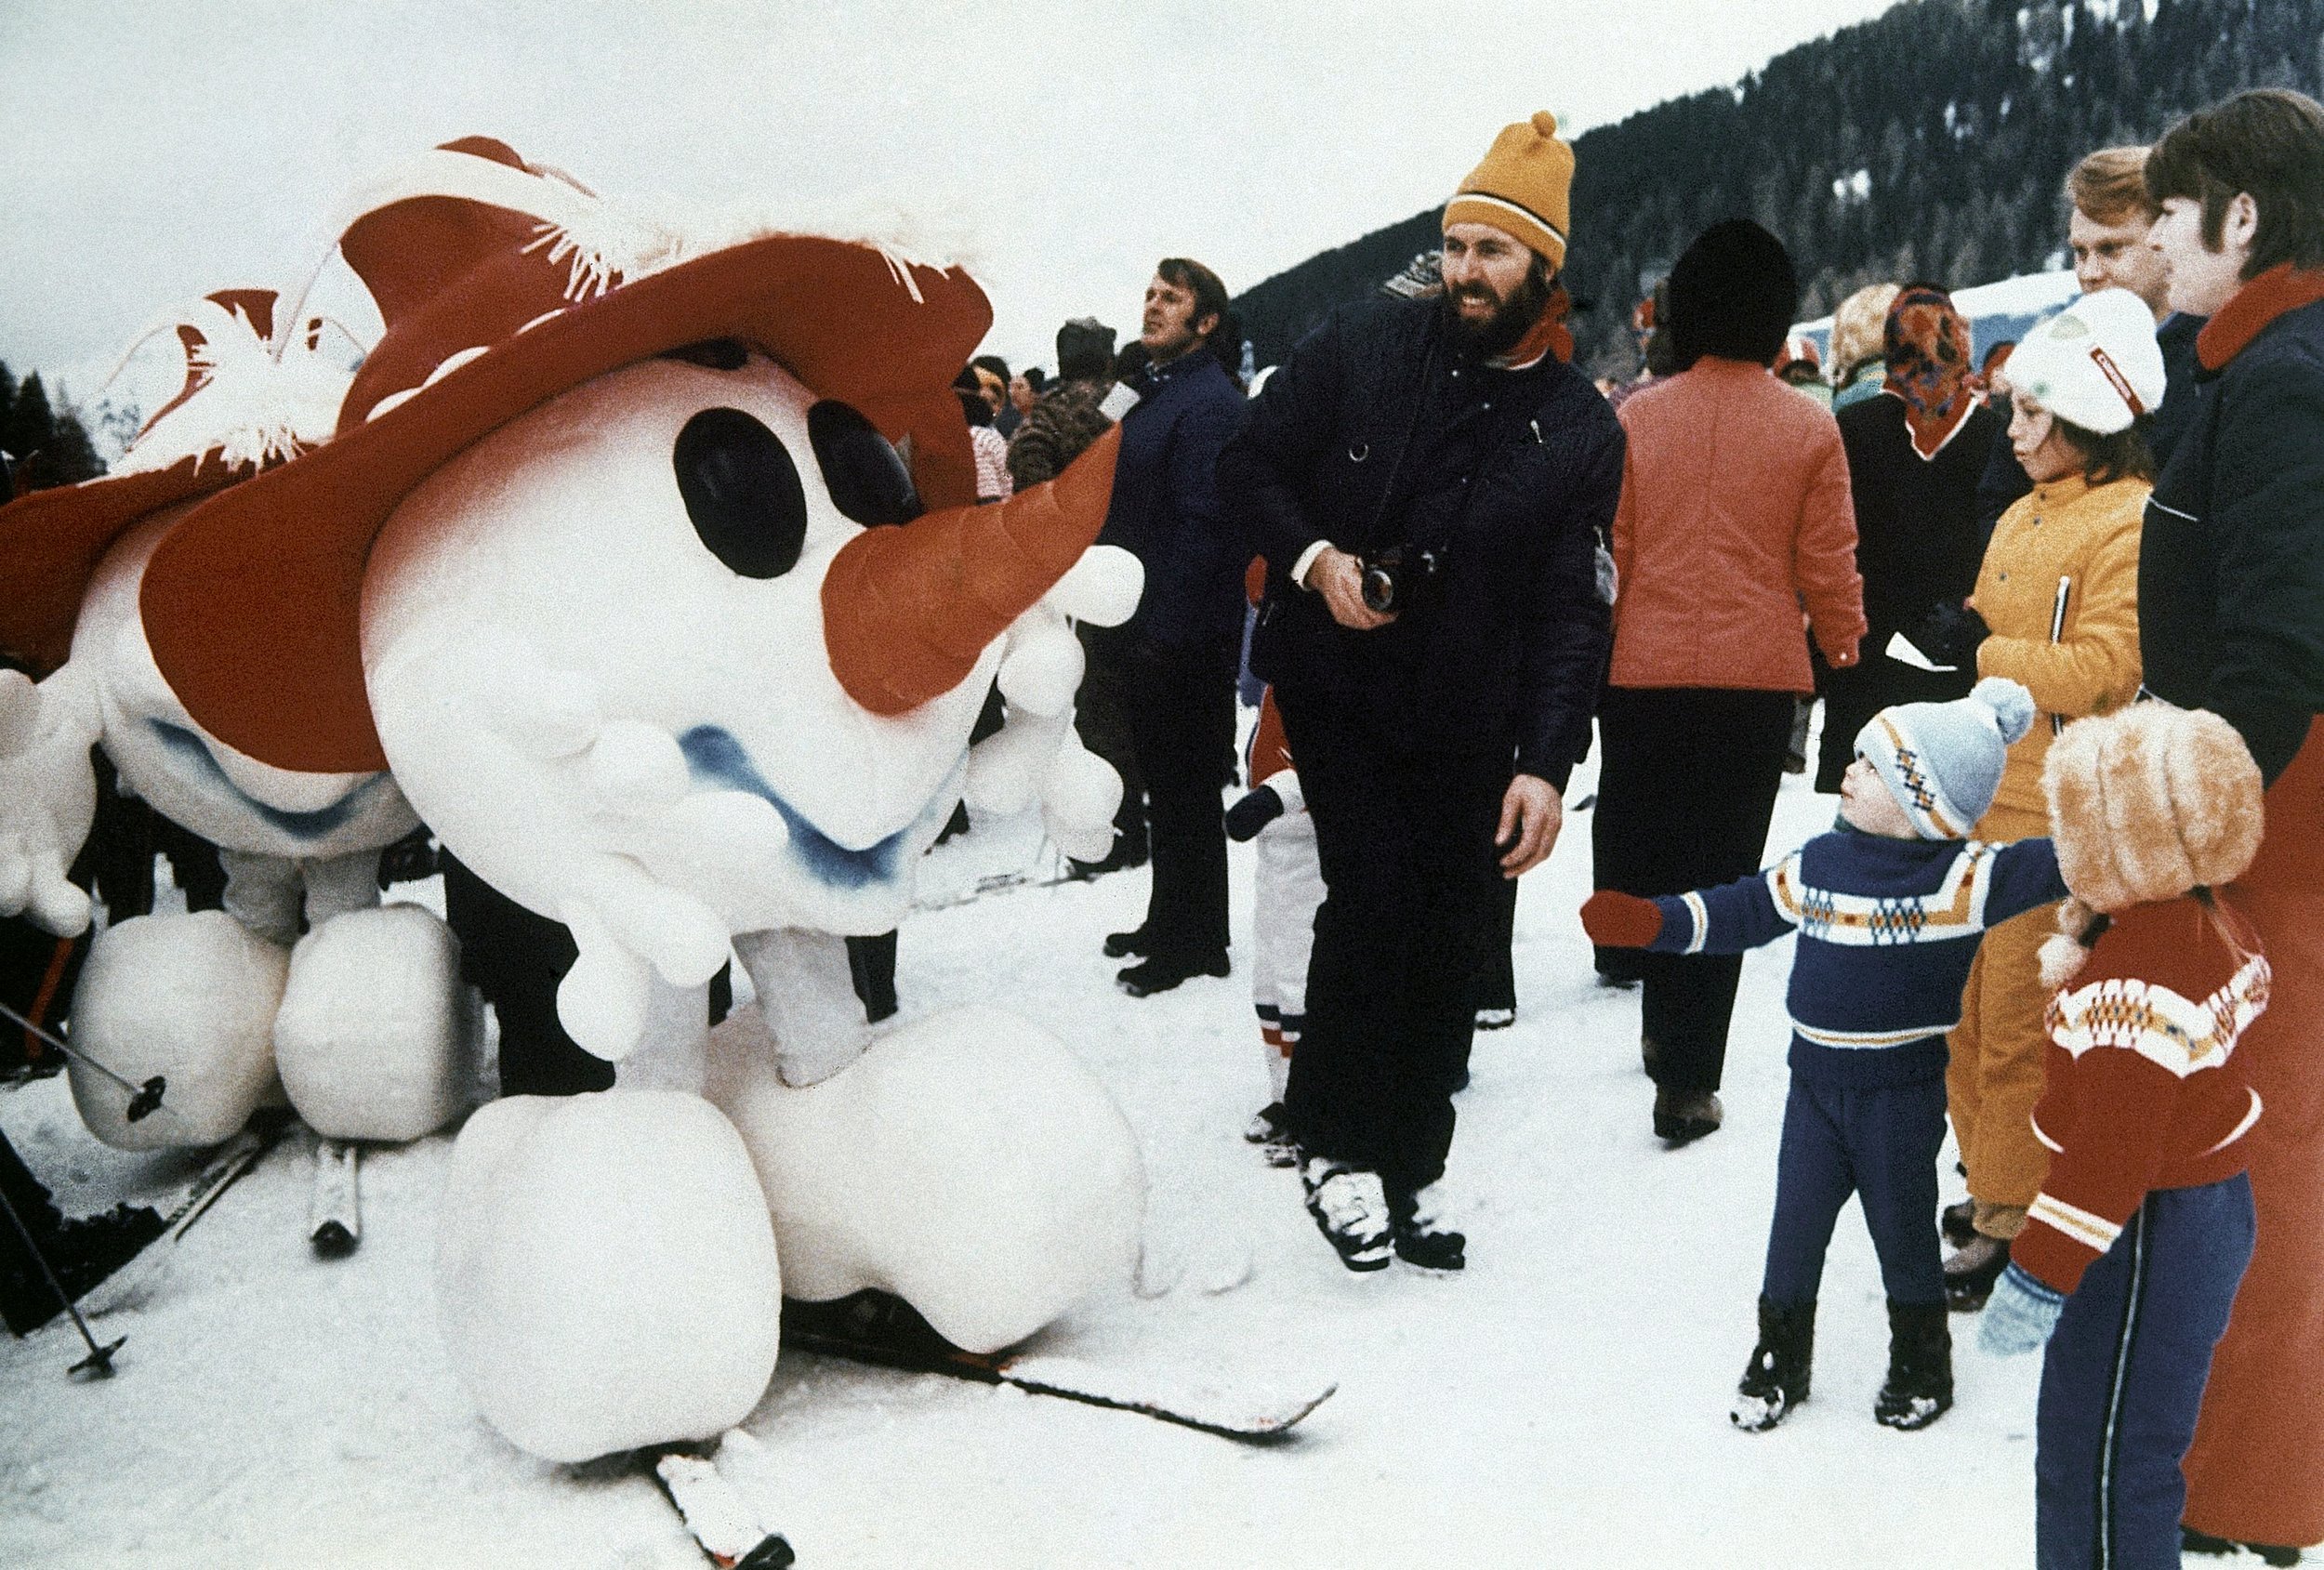  A snowman, mascot of the 1976 Winter Olympics in Innsbruck, greets children in Kitzbuhel, Austria, during the world downhill ski events, January 1975. (AP Photo) 